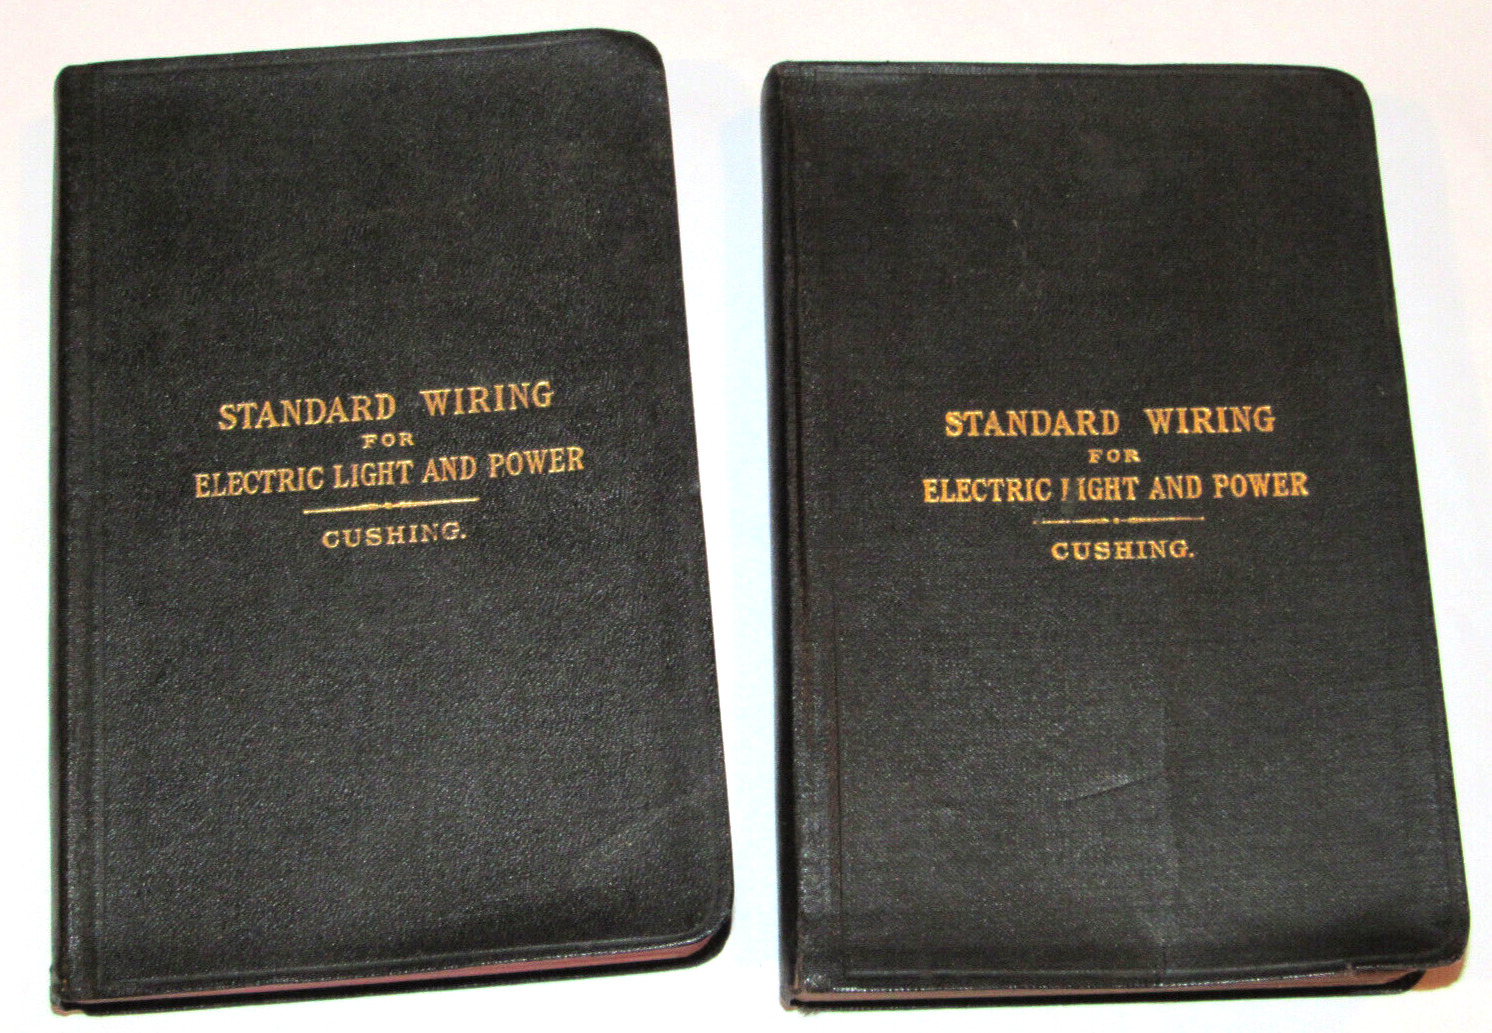 2 BOOKS \'STANDARD WIRING FOR ELECTRIC LIGHT & POWER\' H C CUSHING 1912 & 1913